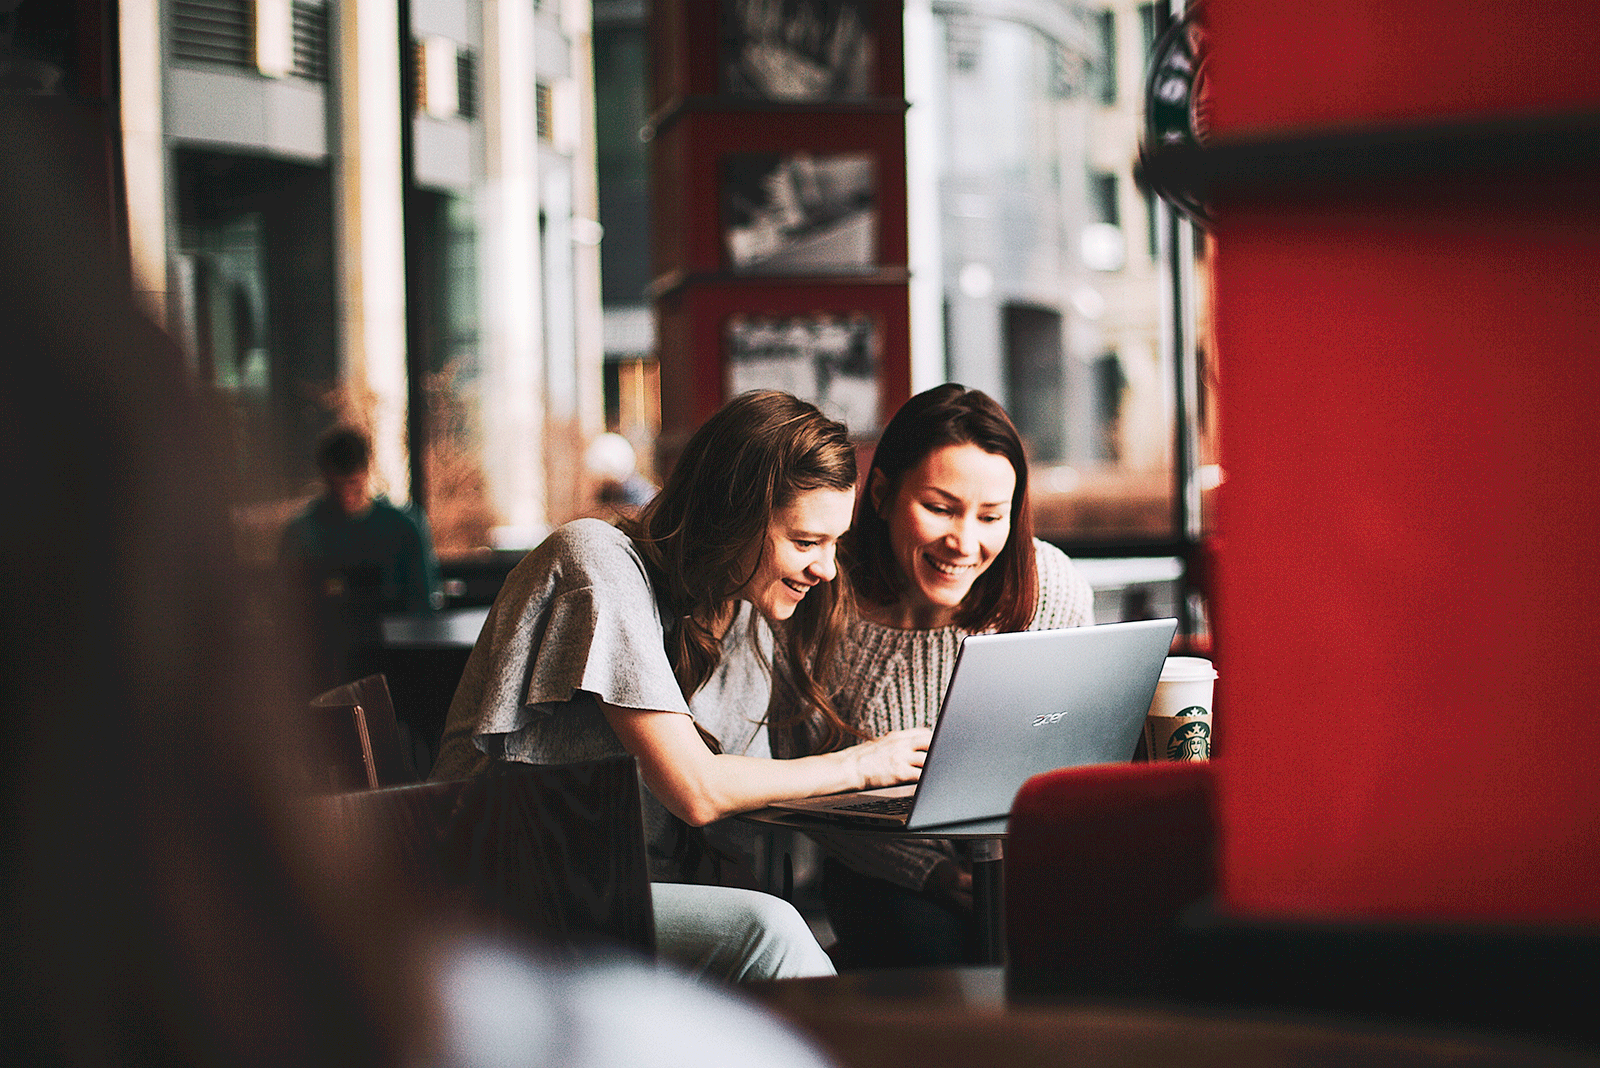 Two women sitting at a table looking at a laptop screen